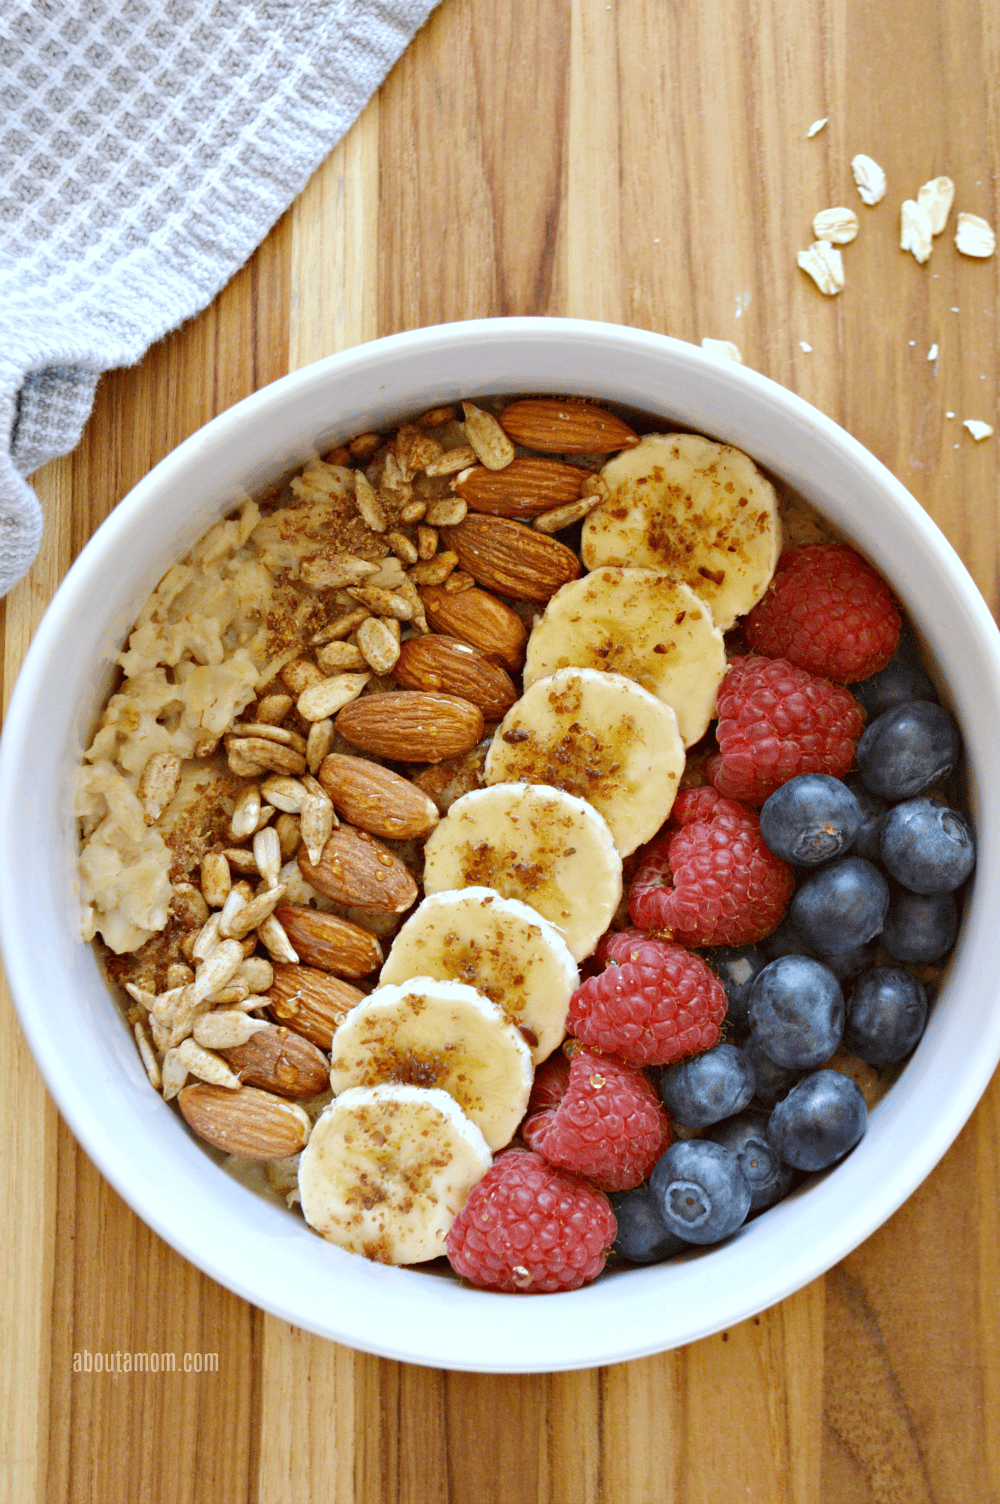 The star of this fruit and nut oatmeal bowl is oats which contains important vitamins, minerals, fiber. Power it up with a variety of toppings, including: banana, blueberries, raspberries, almonds, sunflower seeds, cinnamon, flaxseed, and honey. Eating a healthy breakfast is such a fantastic way to live a better, and healthier life.